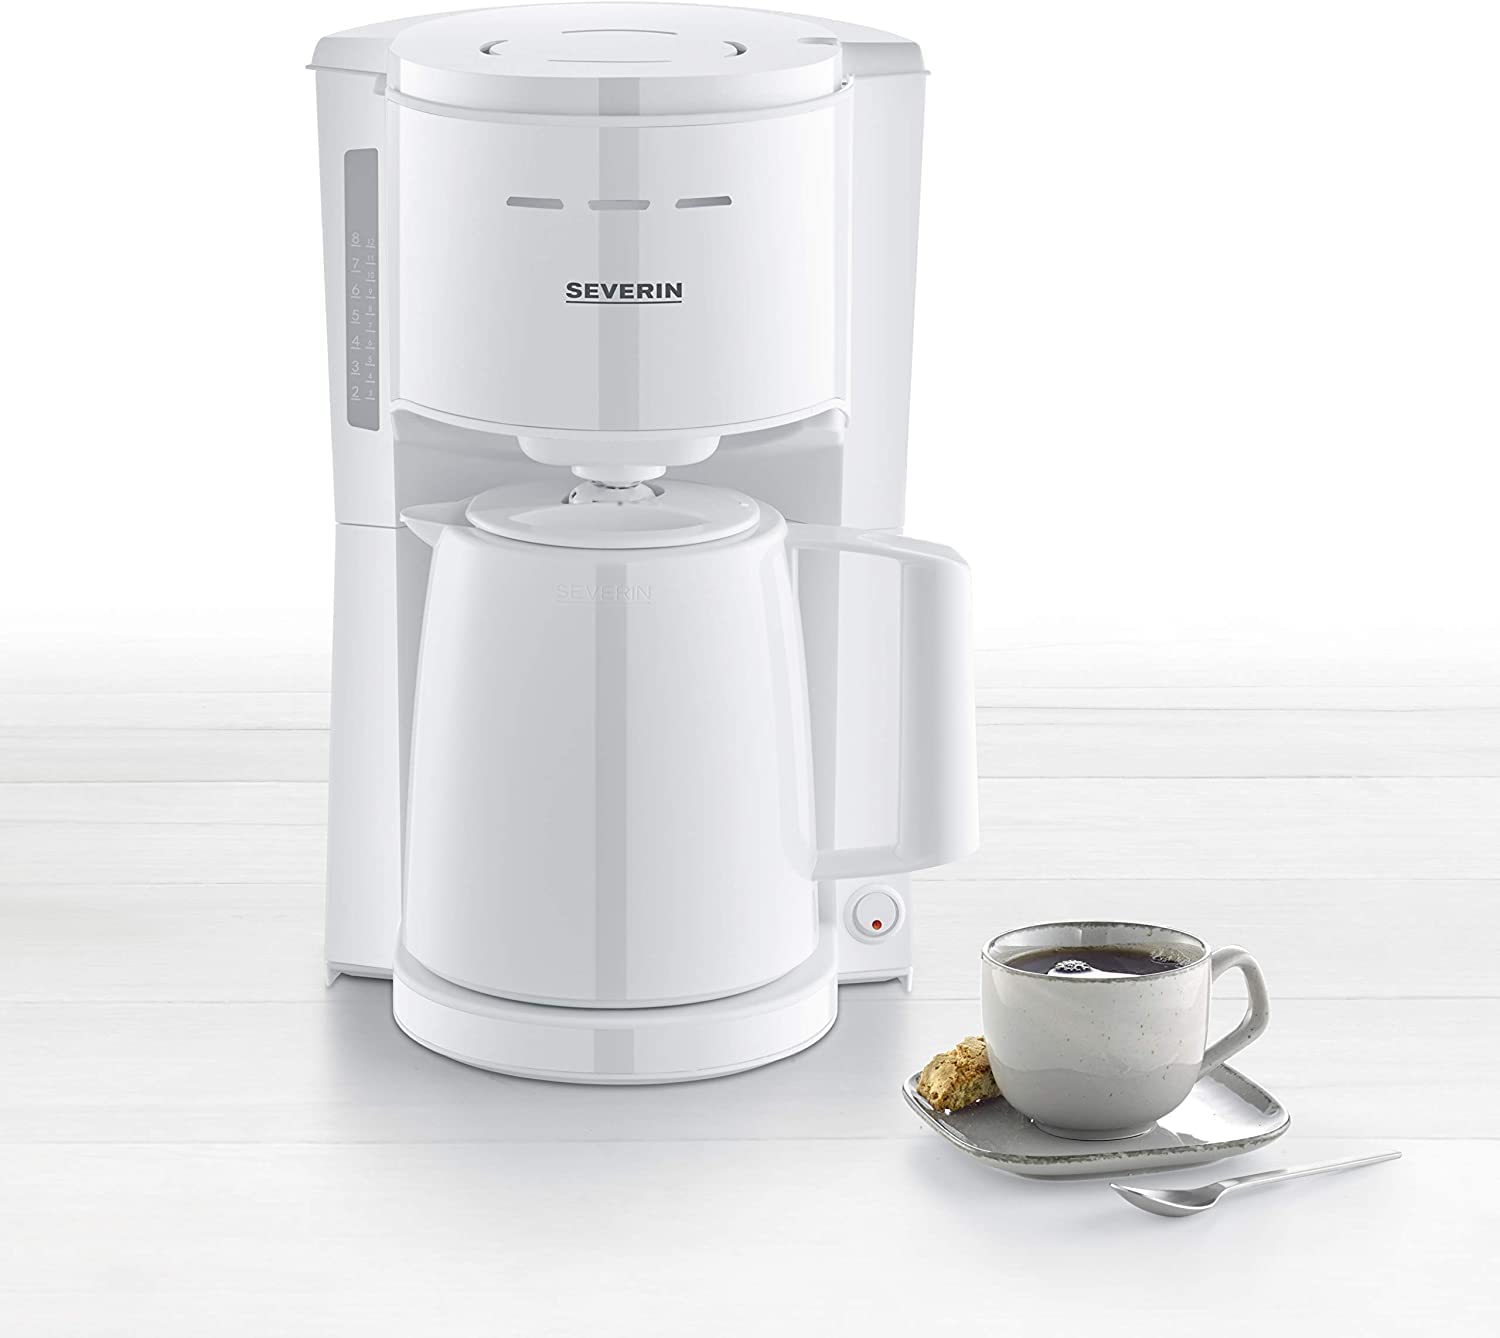 SEVERIN KA 9254 Filter Coffee Maker with Thermos Flask Approx. 1000 W, up to 8 Cups, Swivel Filter 1 x 4 with Drip Lock, Automatic Shut-Off, Brew Lid, White